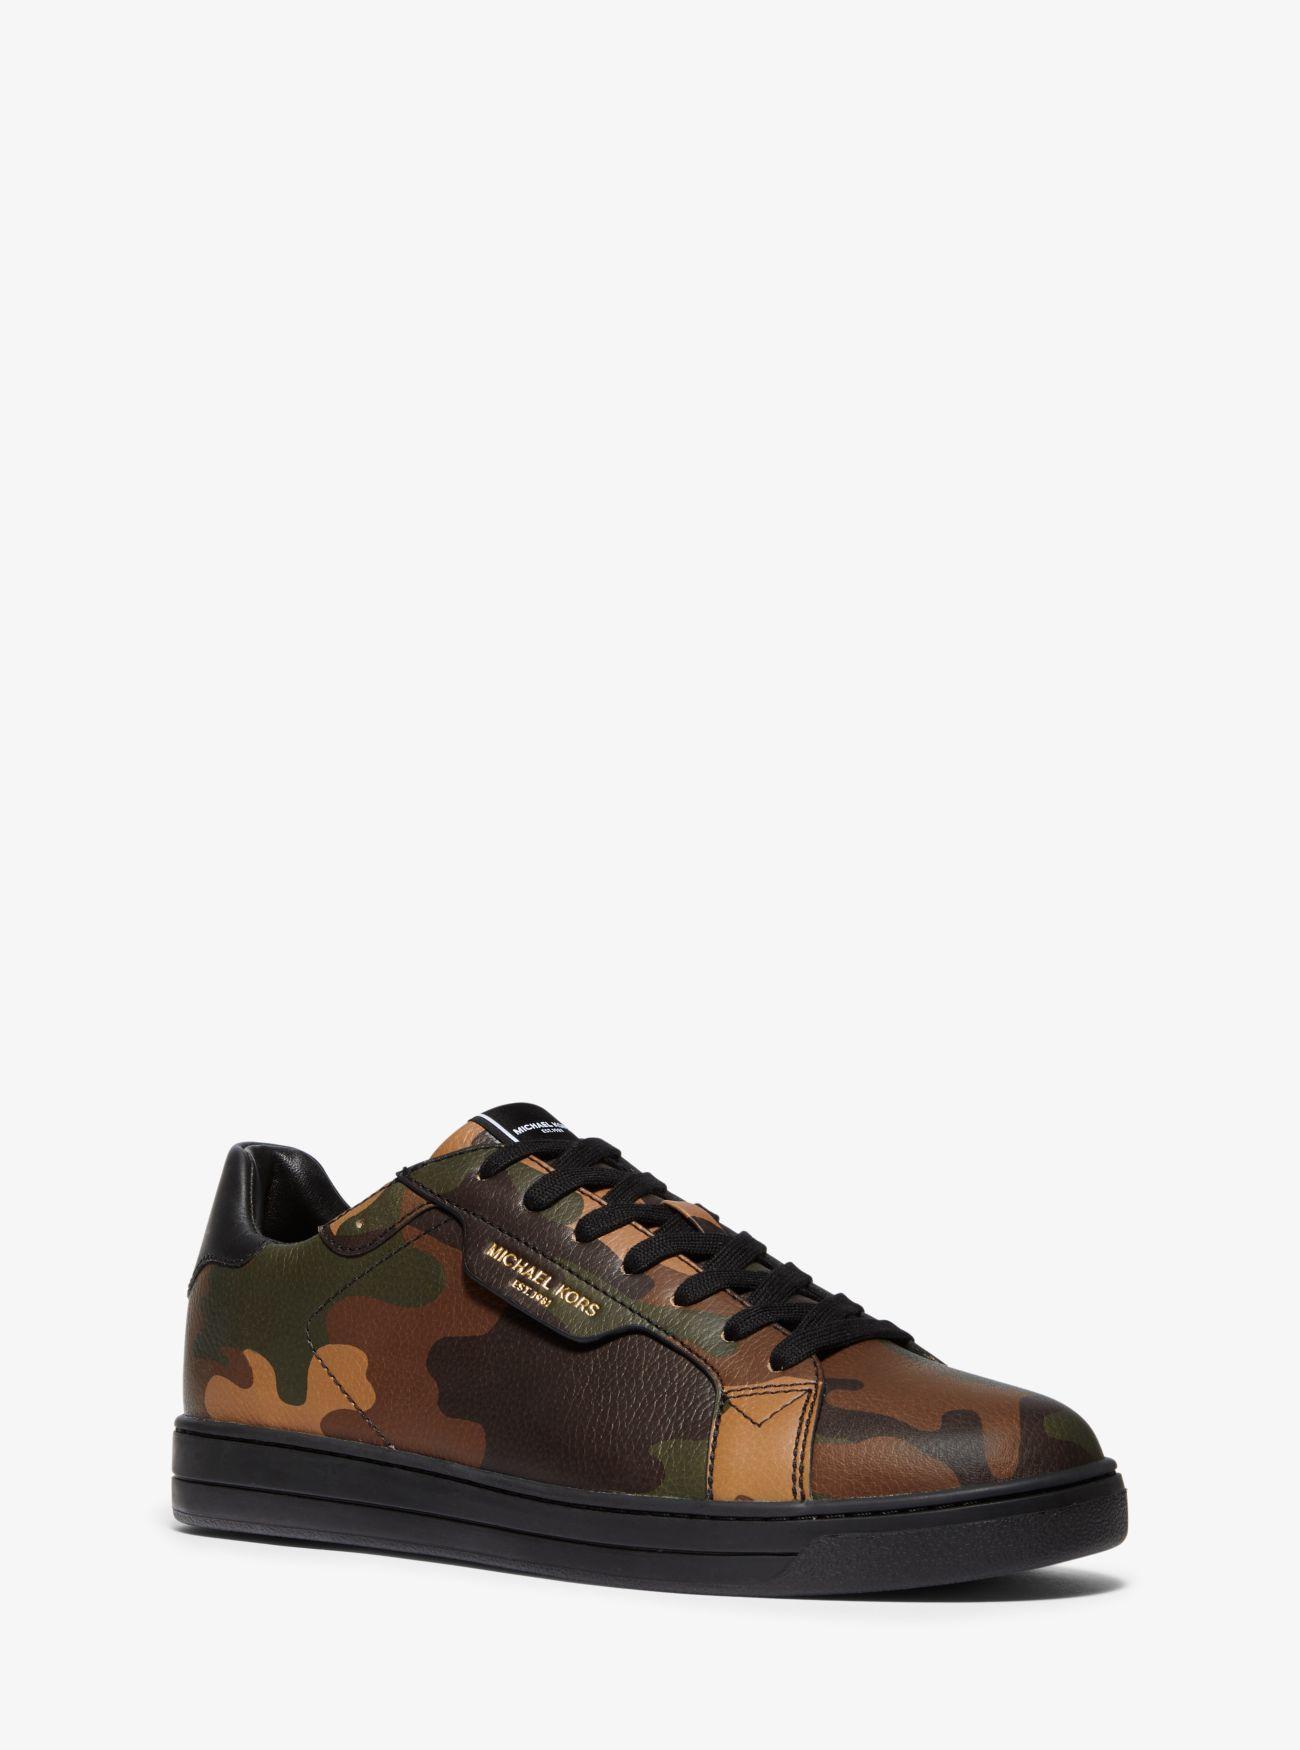 Michael Kors Leather Keating Fashion Sneakers in Green for Men - Save ...